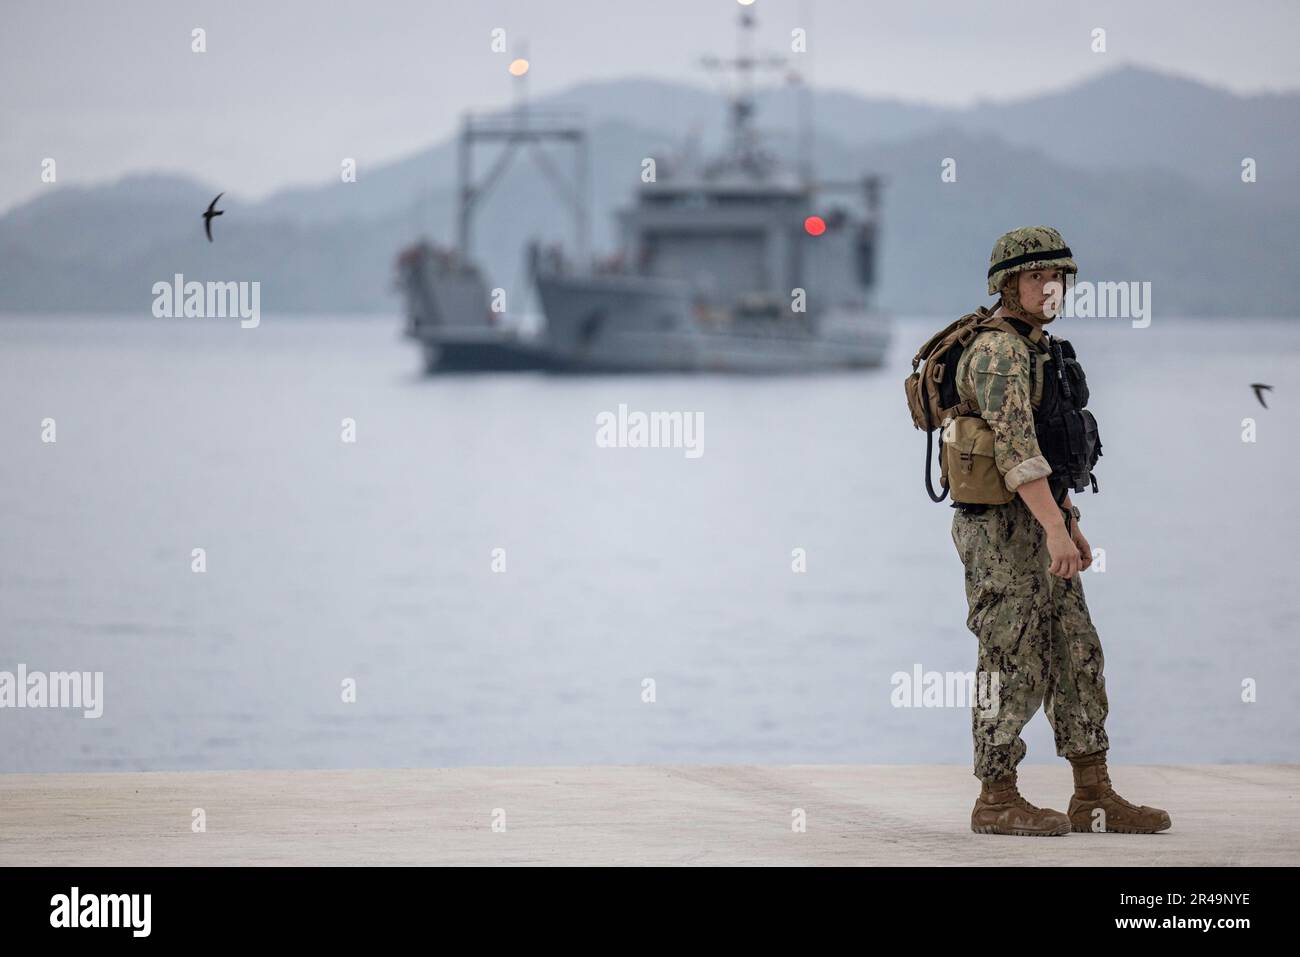 U.S. Navy Seaman Gerardo Salgado, with Beachmaster Unit 1, and a native of Atlanta, Georgia, prepares to guide Army USAV Fort McHenry, LCU-2020 during a combined joint logistics over-the-shore offload in preparation for Balikatan 23 at Camp Agnew, Casiguran, Philippines, April 6, 2023. Balikatan is an annual exercise between the Armed Forces of the Philippines and U.S. military designed to strengthen bilateral interoperability, capabilities, trust, and cooperation built over decades shared experiences. Stock Photo